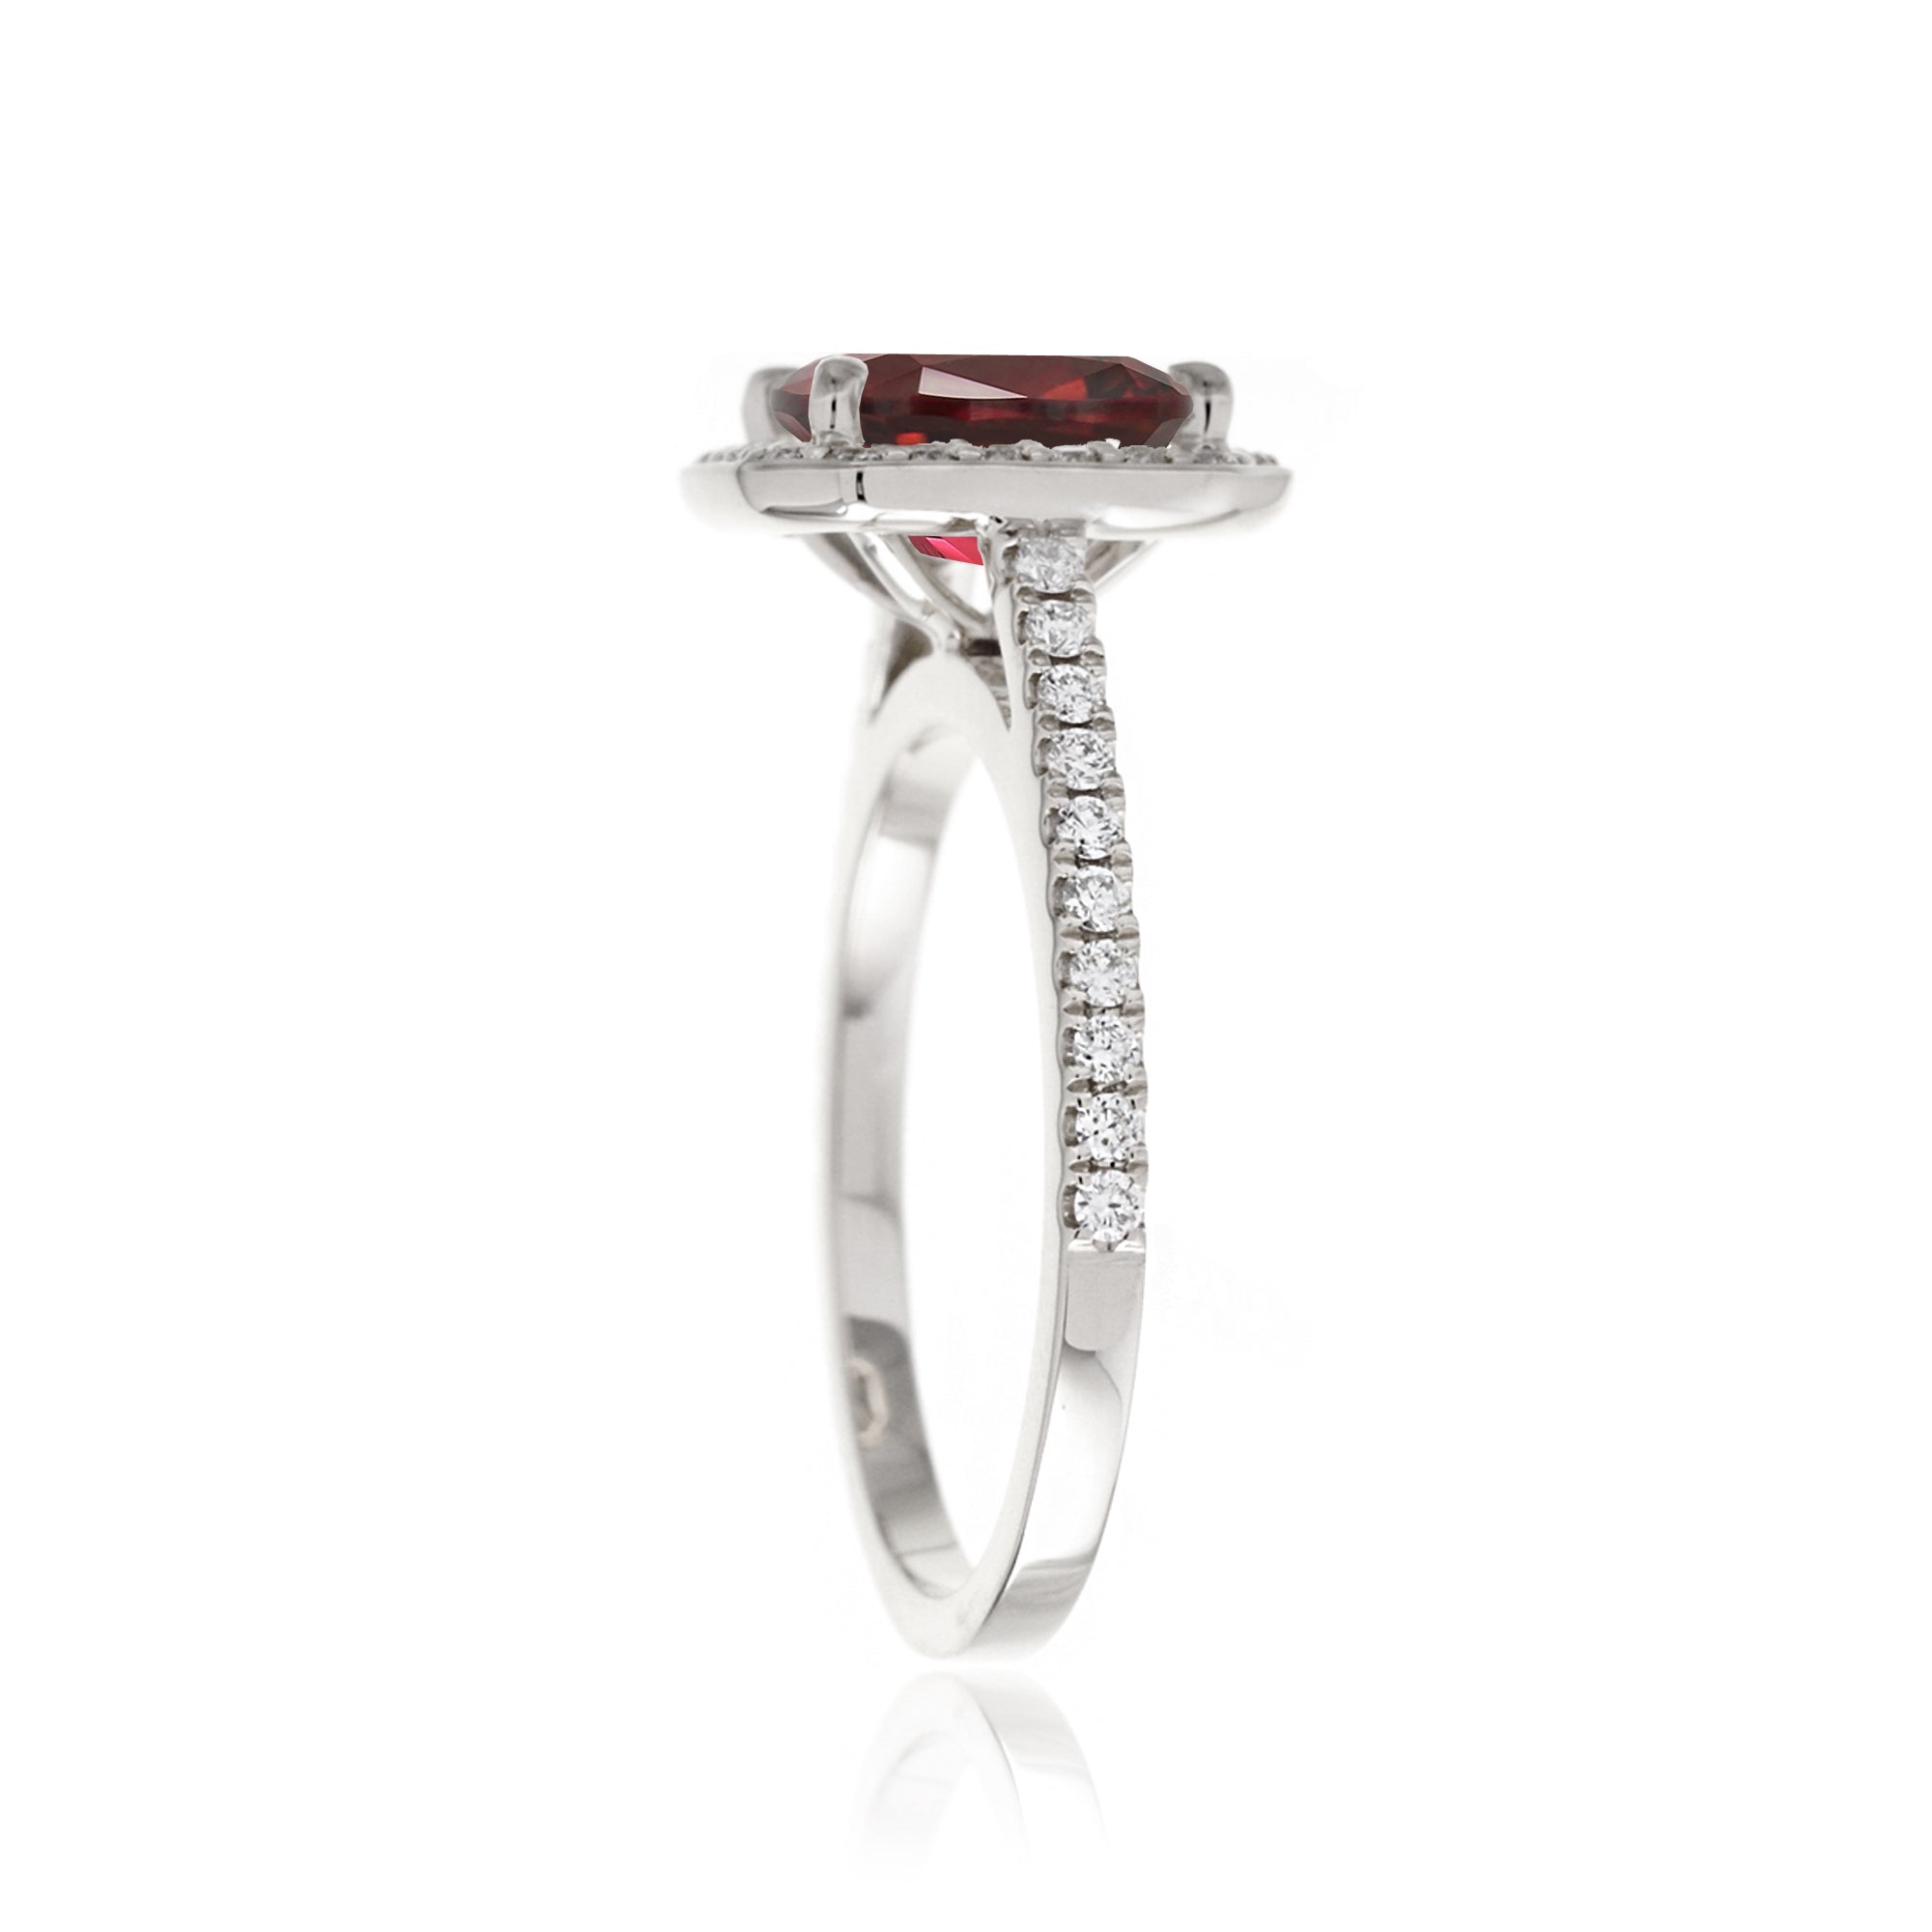 Cushion lab-grown ruby diamond halo cathedral engagement ring - the Steffy white gold